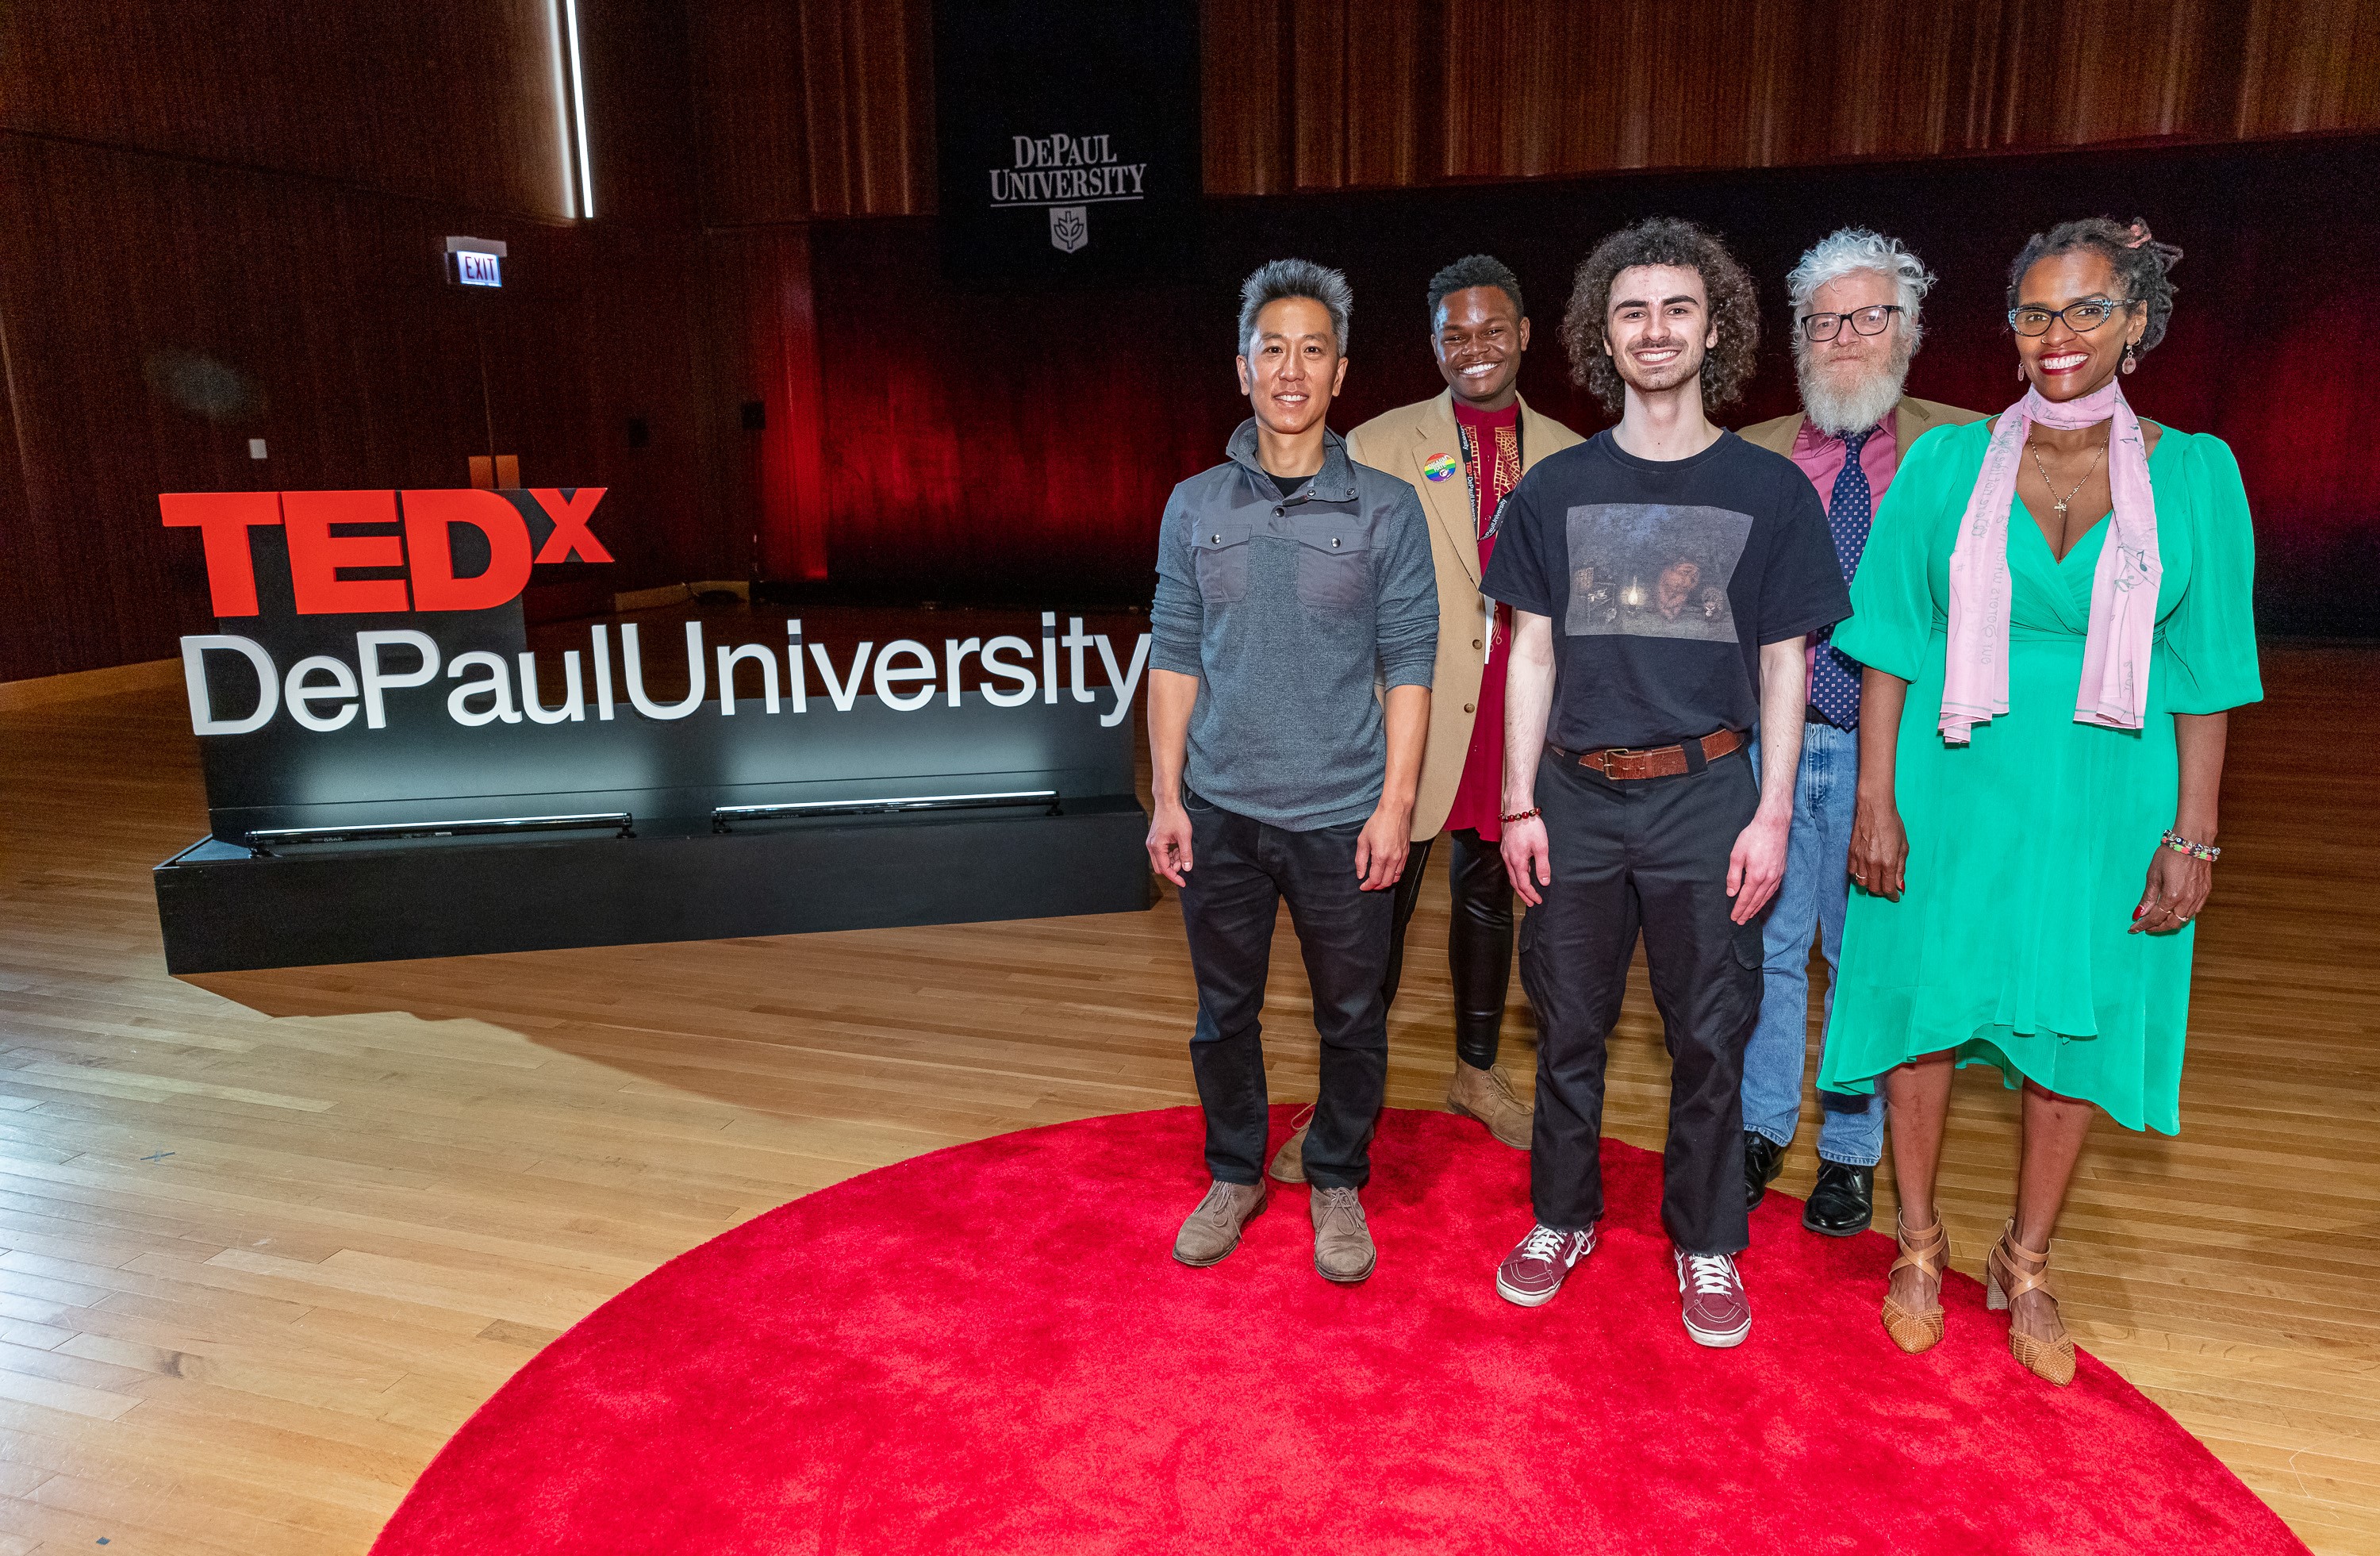 2022's five TEDx speakers stand on stage after the event